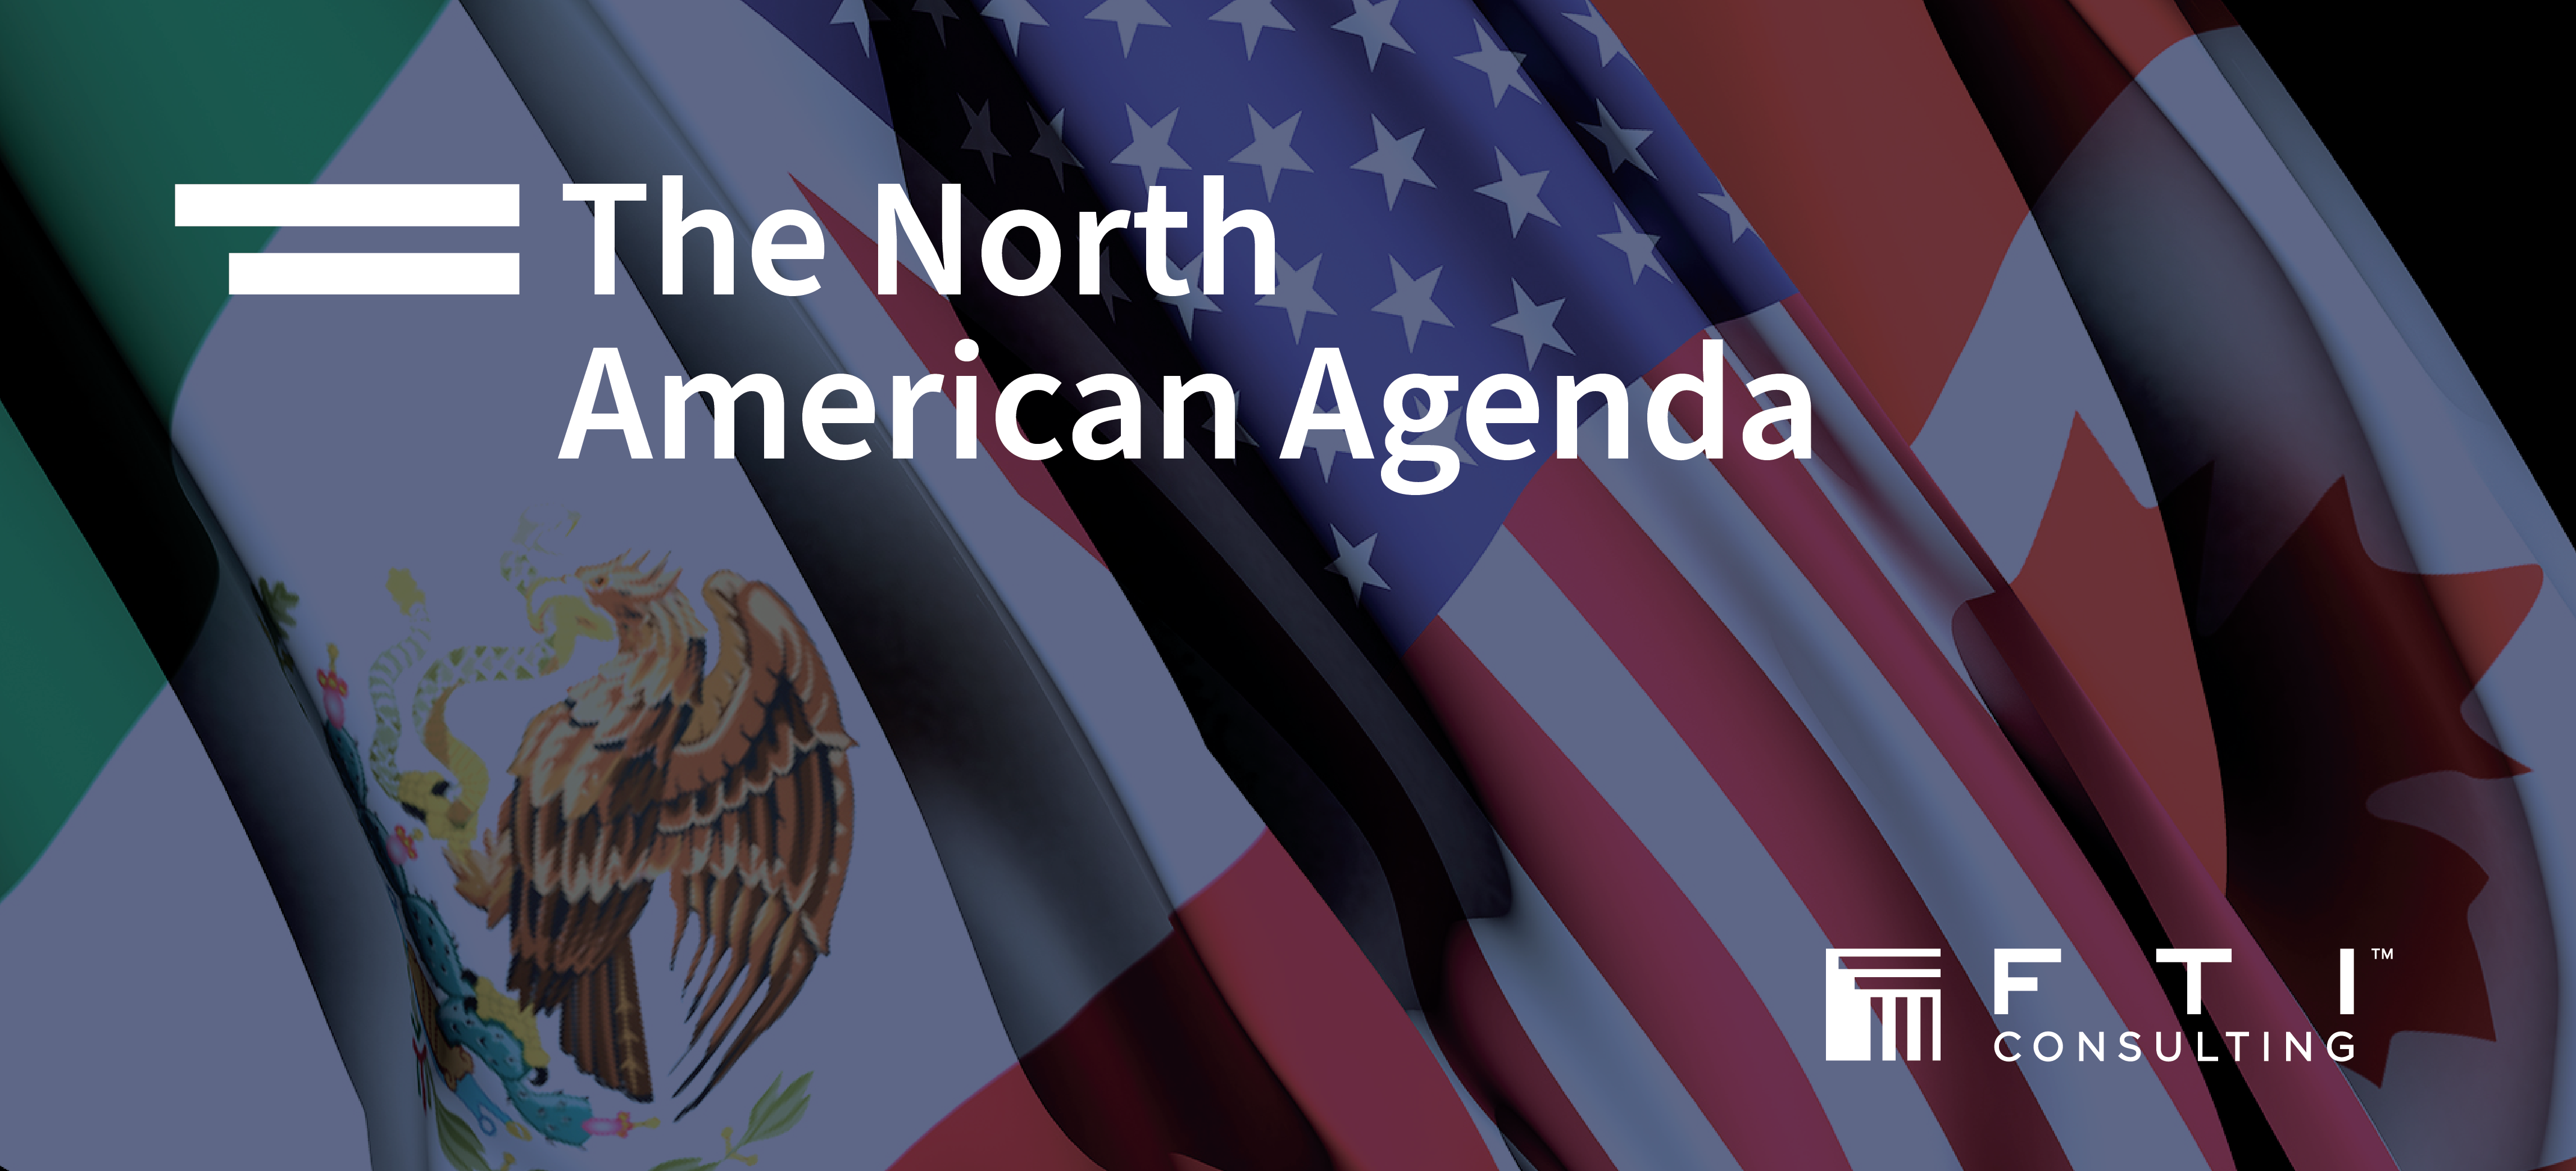 Mexico, USA and Canada flags in the background with text The North American Agenda and FTI Consulting logo